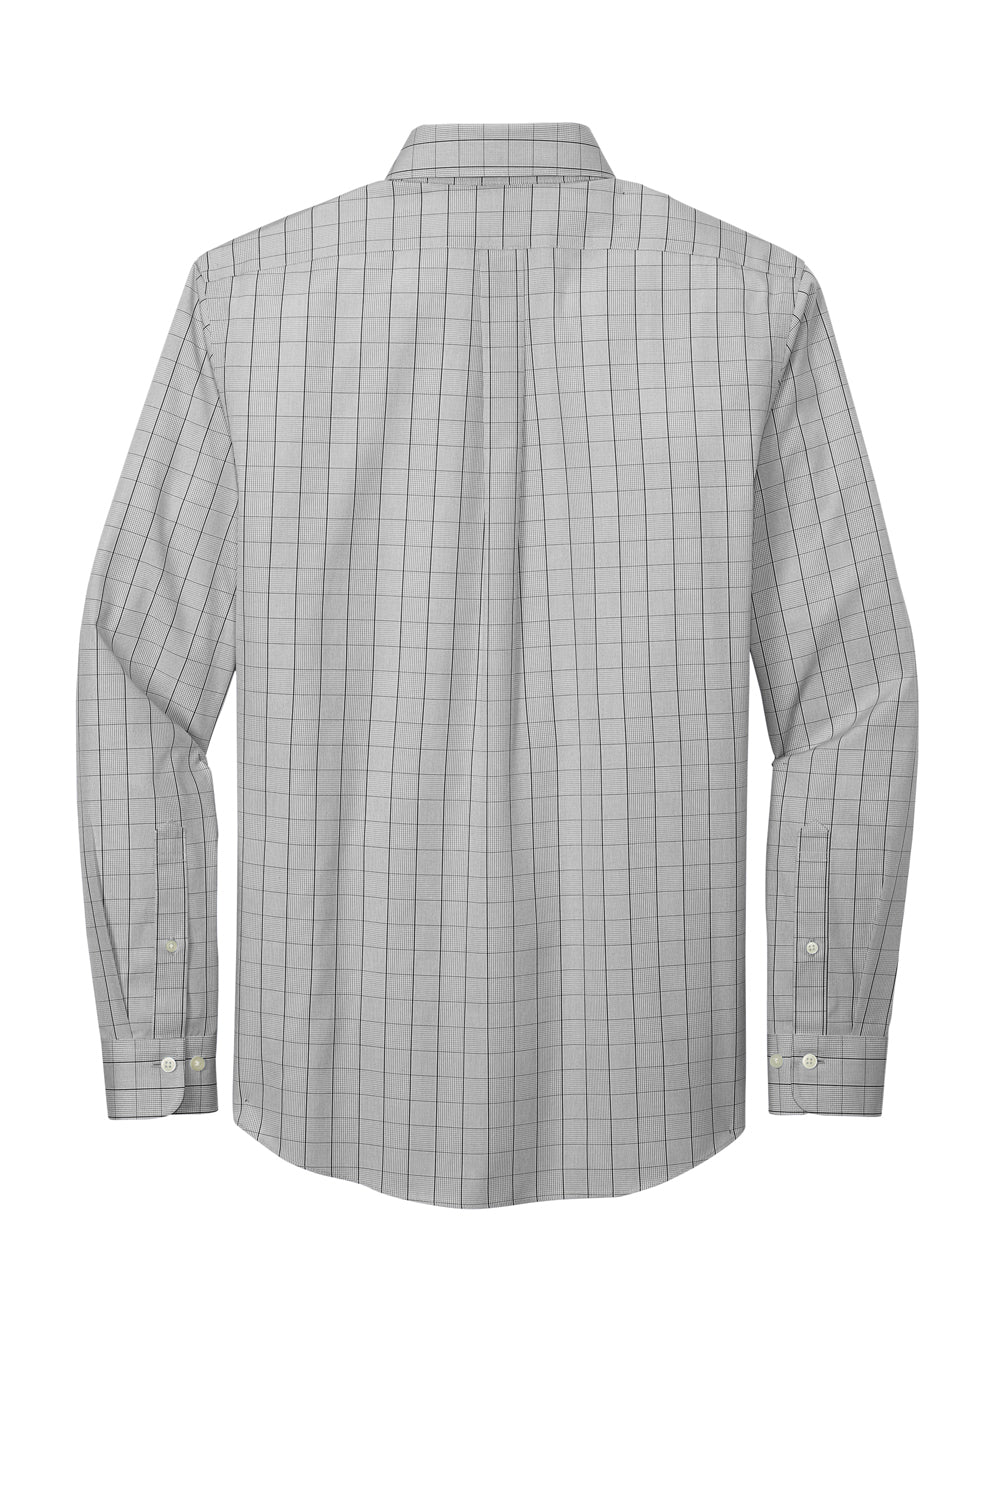 Brooks Brothers Mens Wrinkle Resistant Long Sleeve Button Down Shirt w/ Pocket Shadow Grey Flat Back